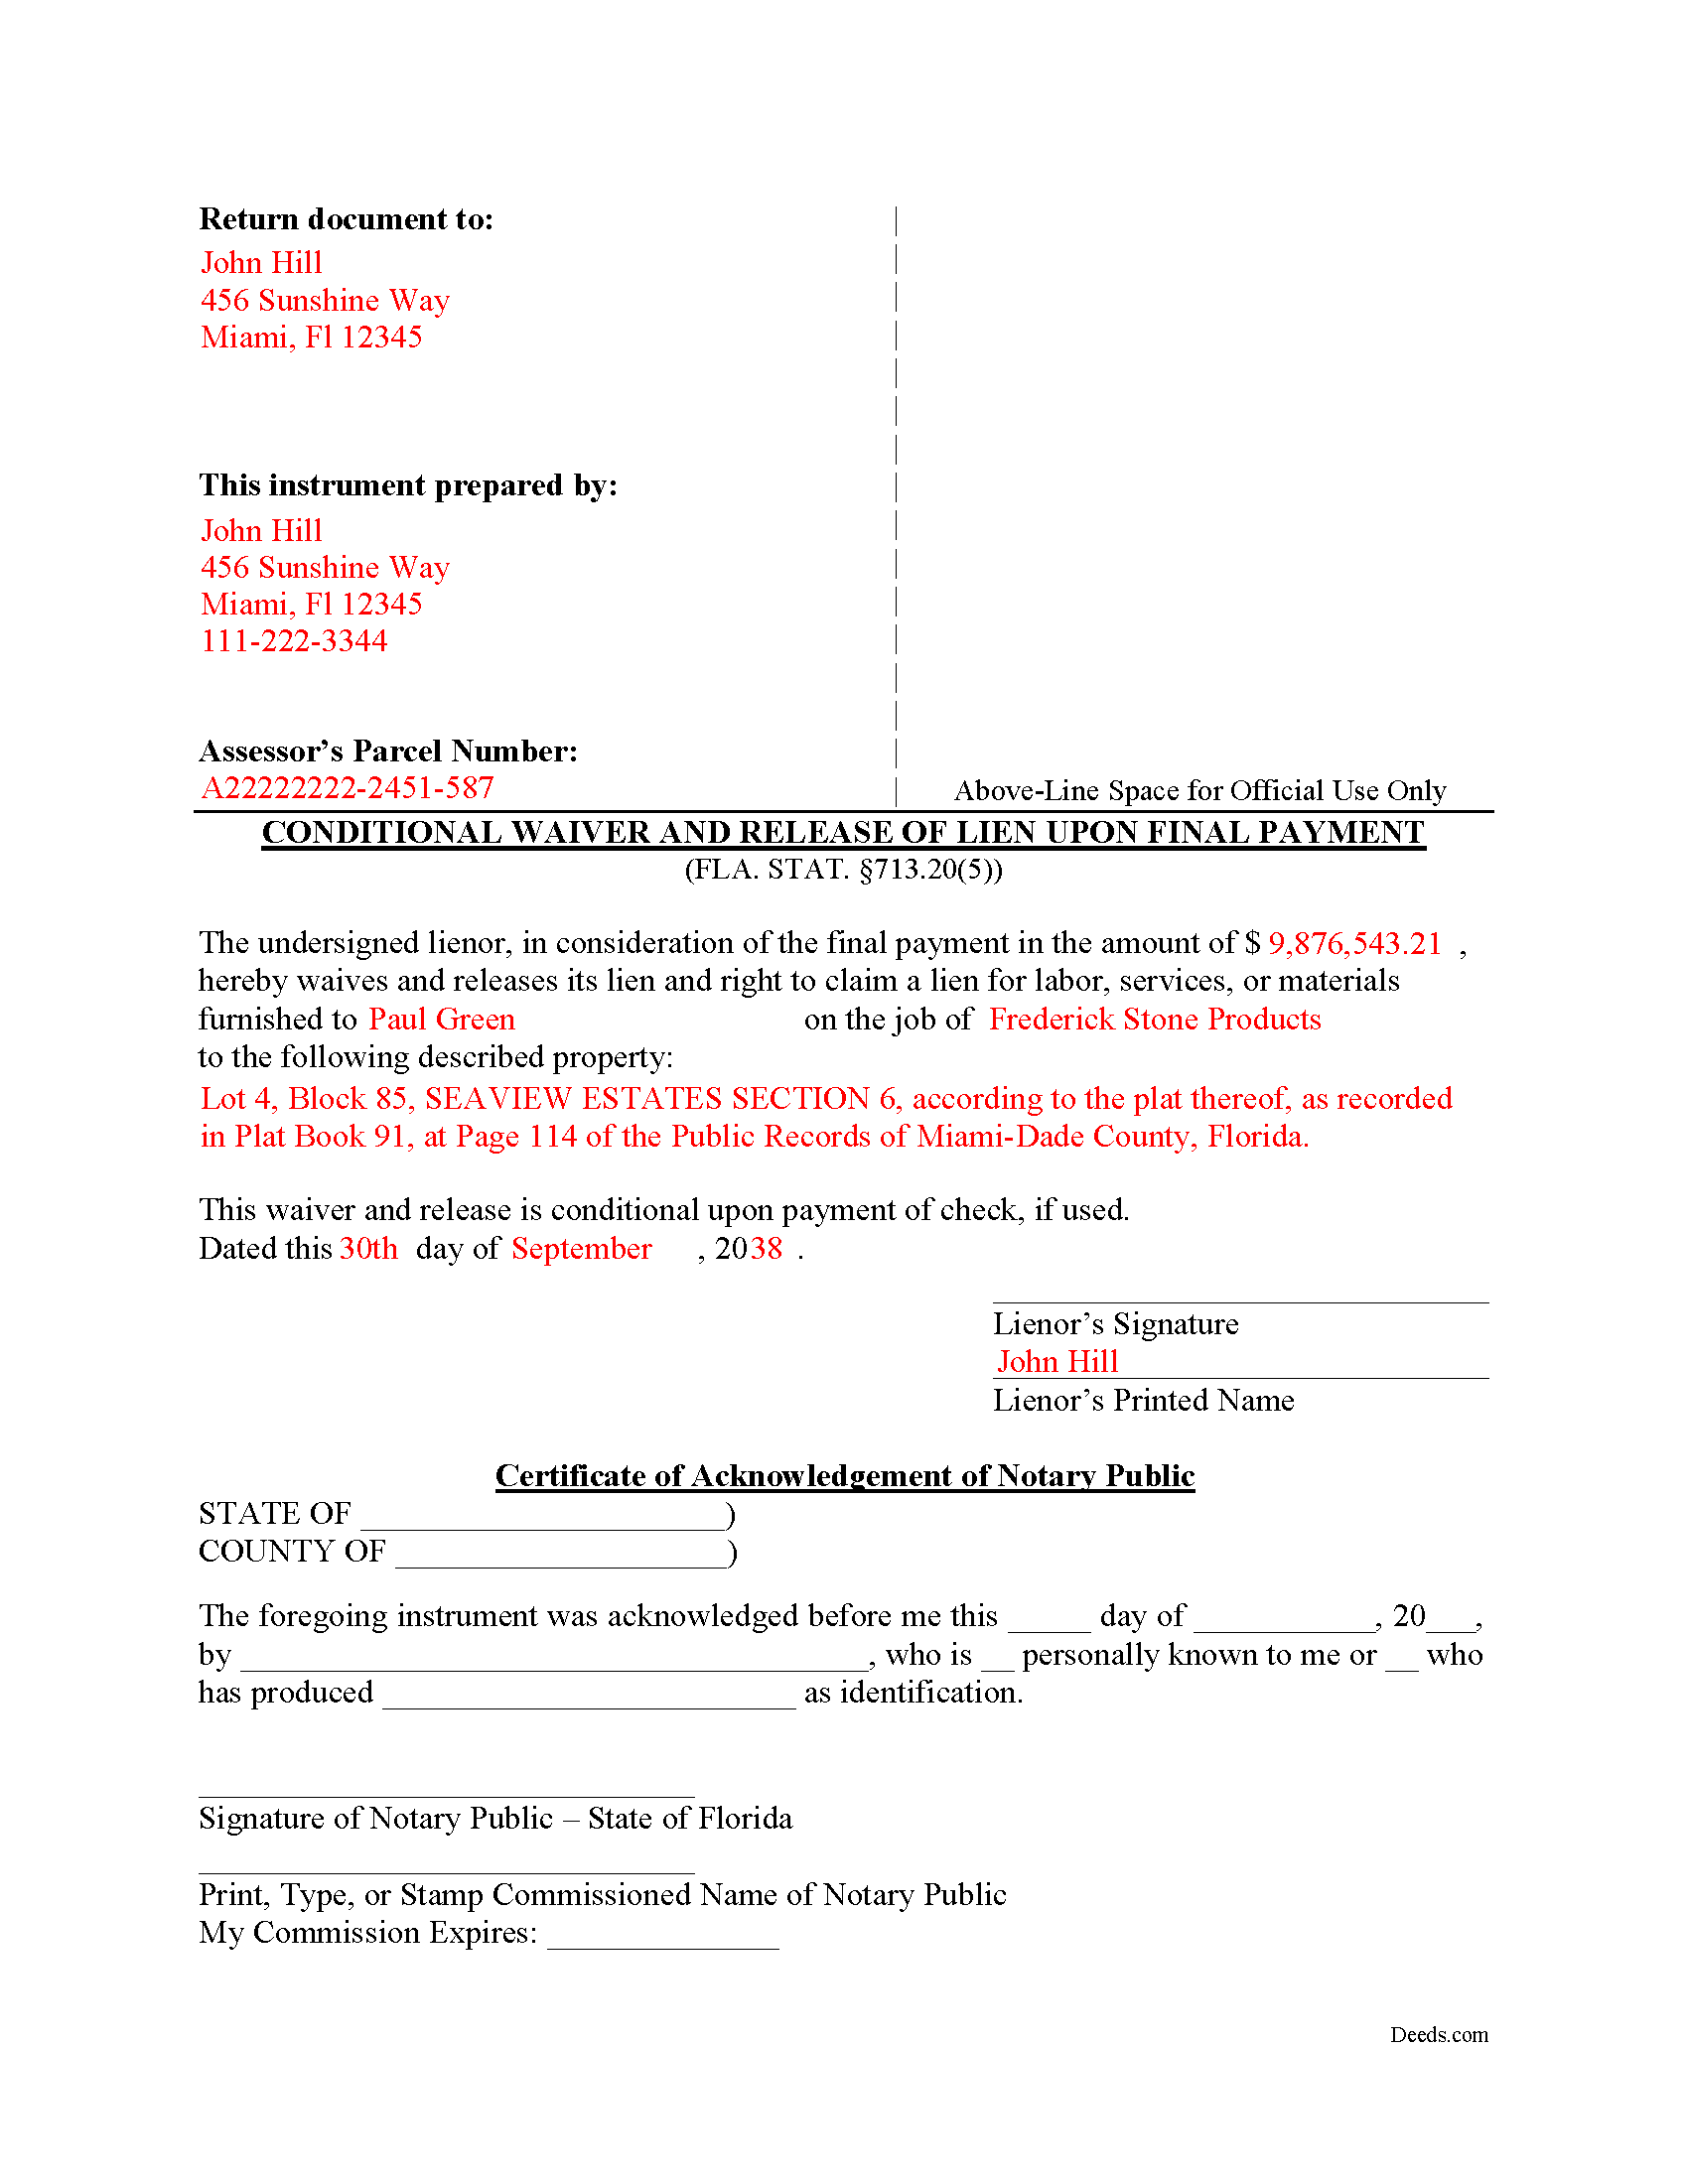 Completed Example of the Conditional Waiver and Release of Lien upon Final Payment Document